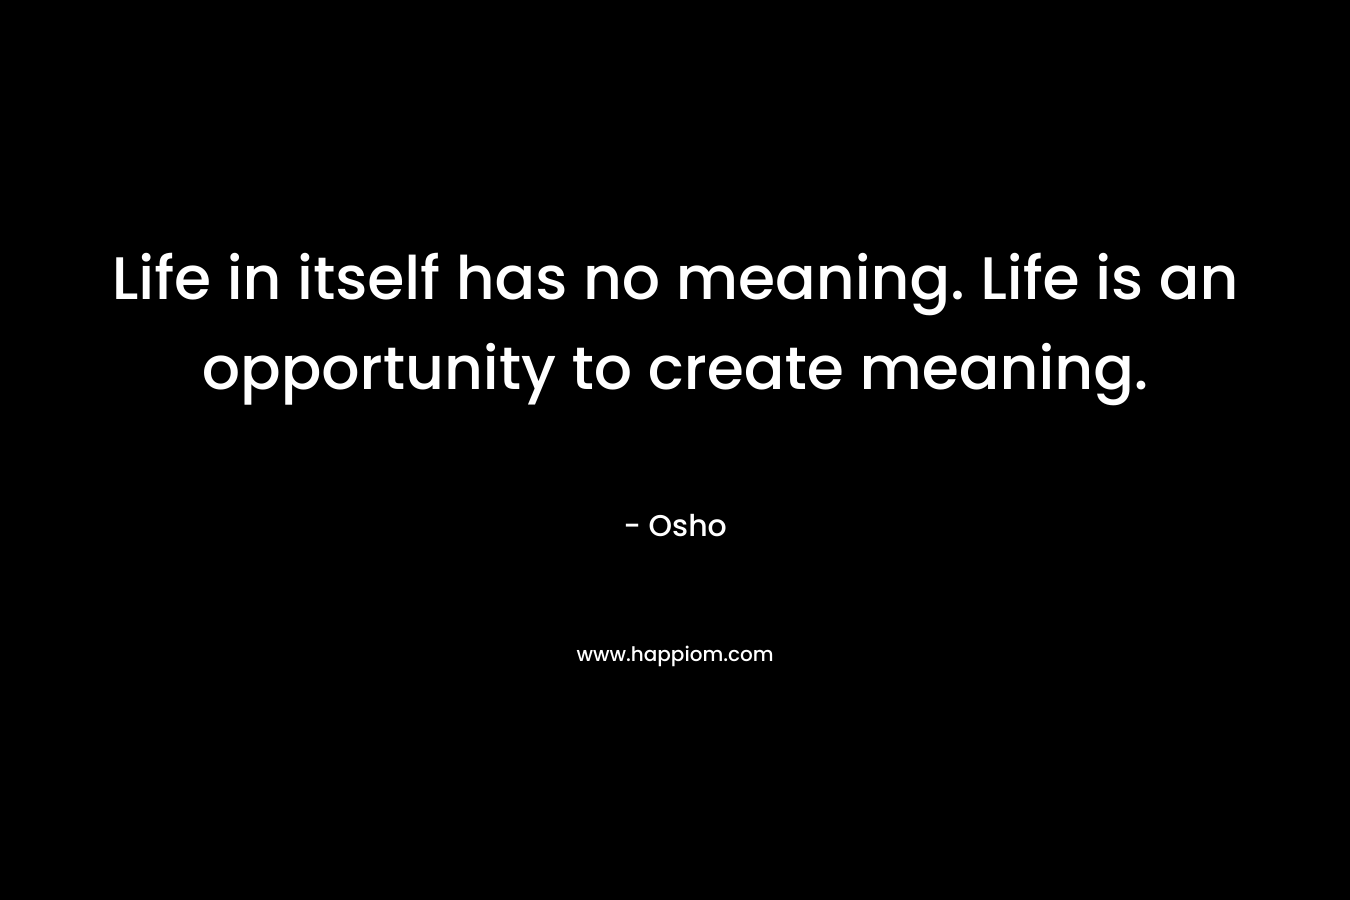 Life in itself has no meaning. Life is an opportunity to create meaning.